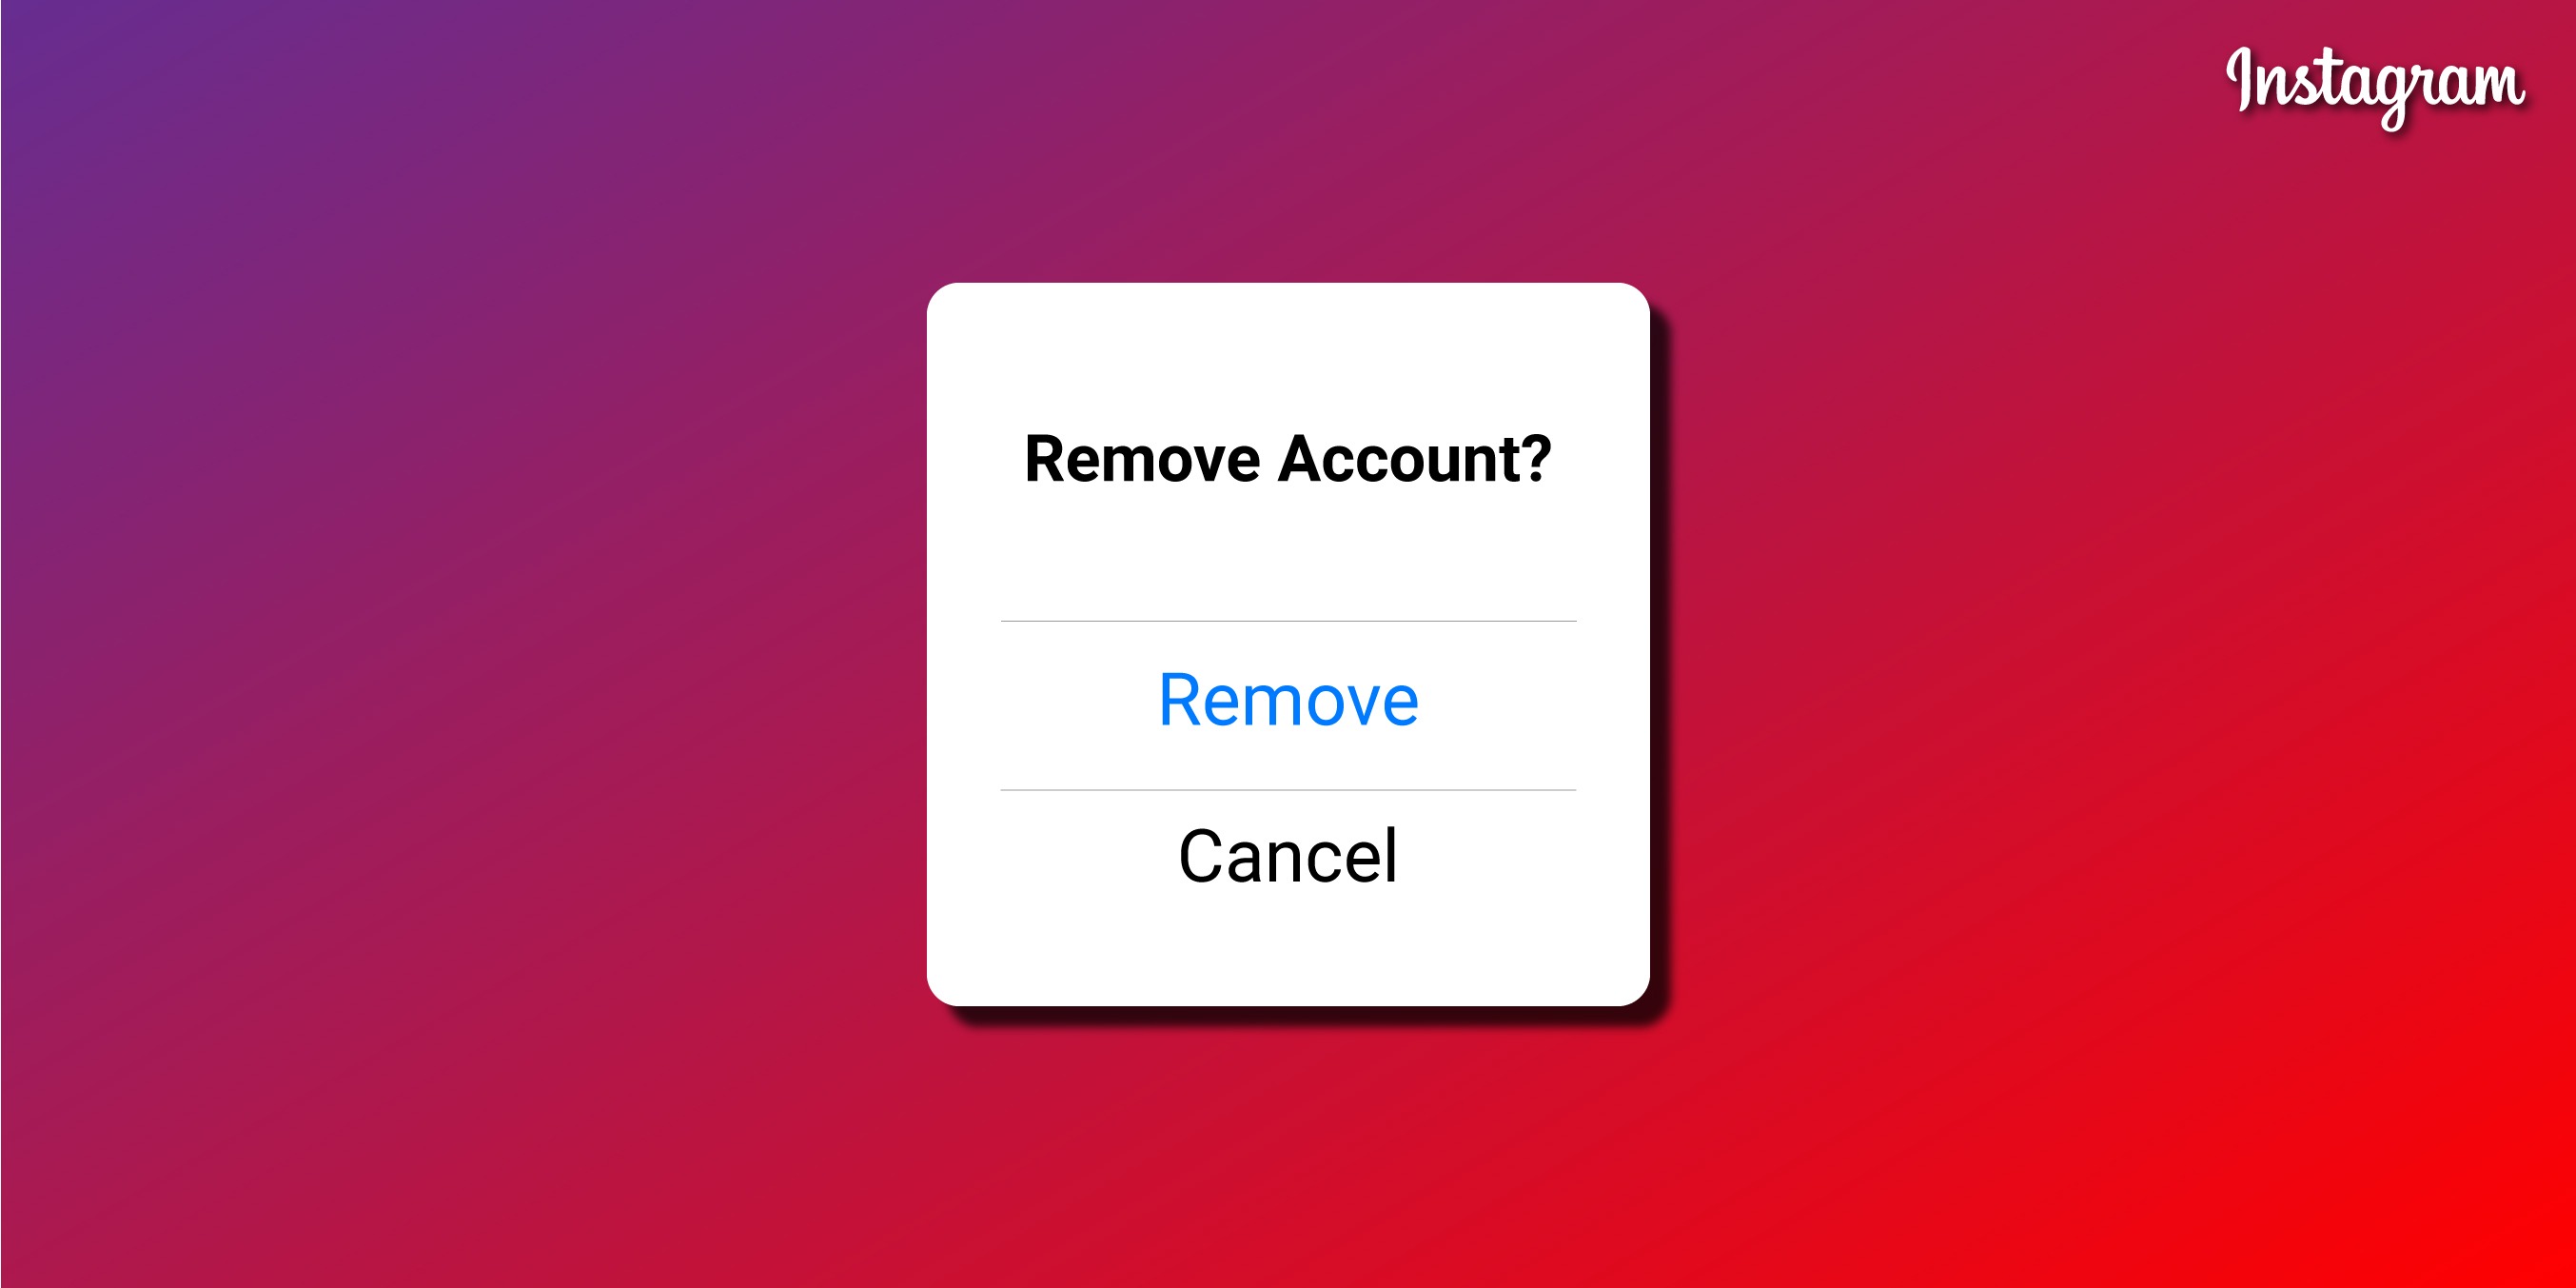 How To Remove Instagram Remembered Accounts